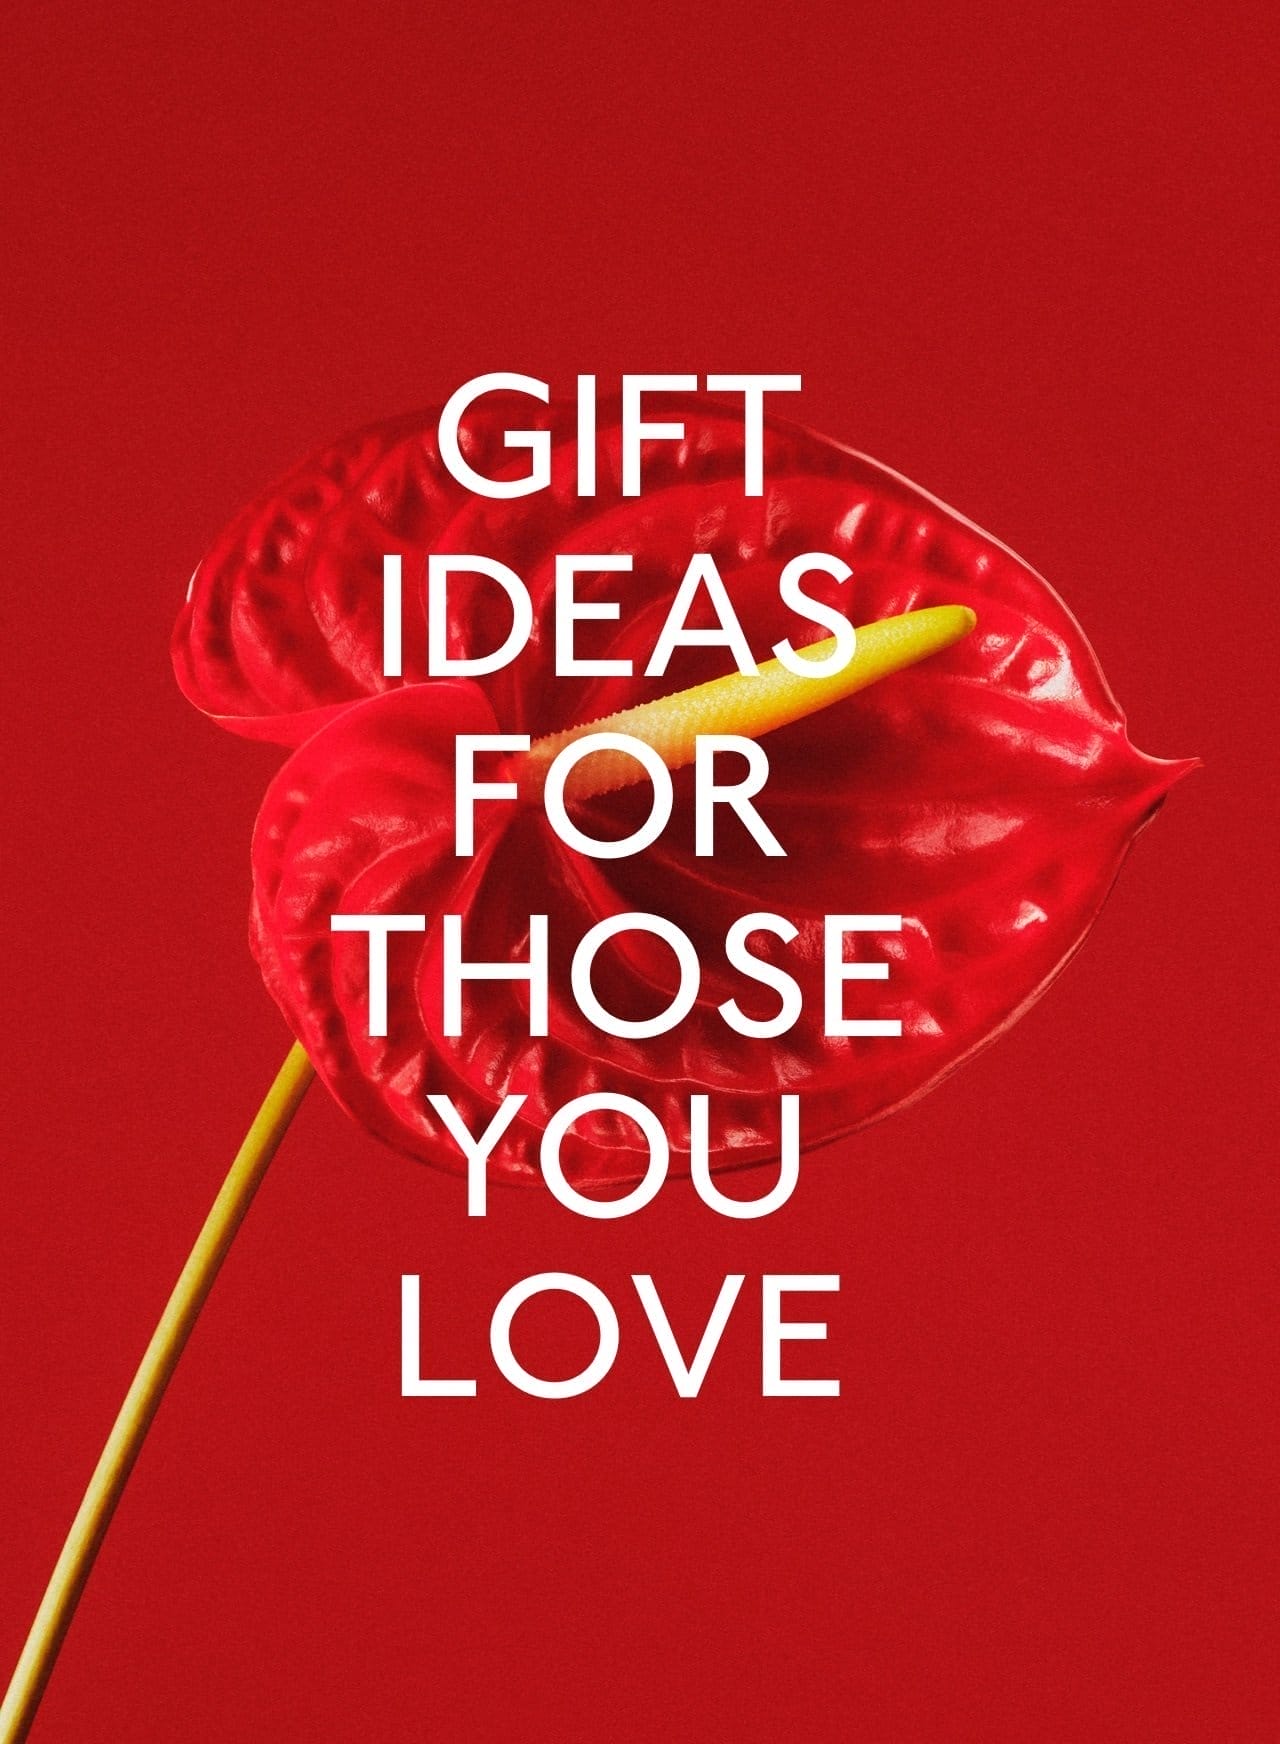 Gift ideas for those you love.